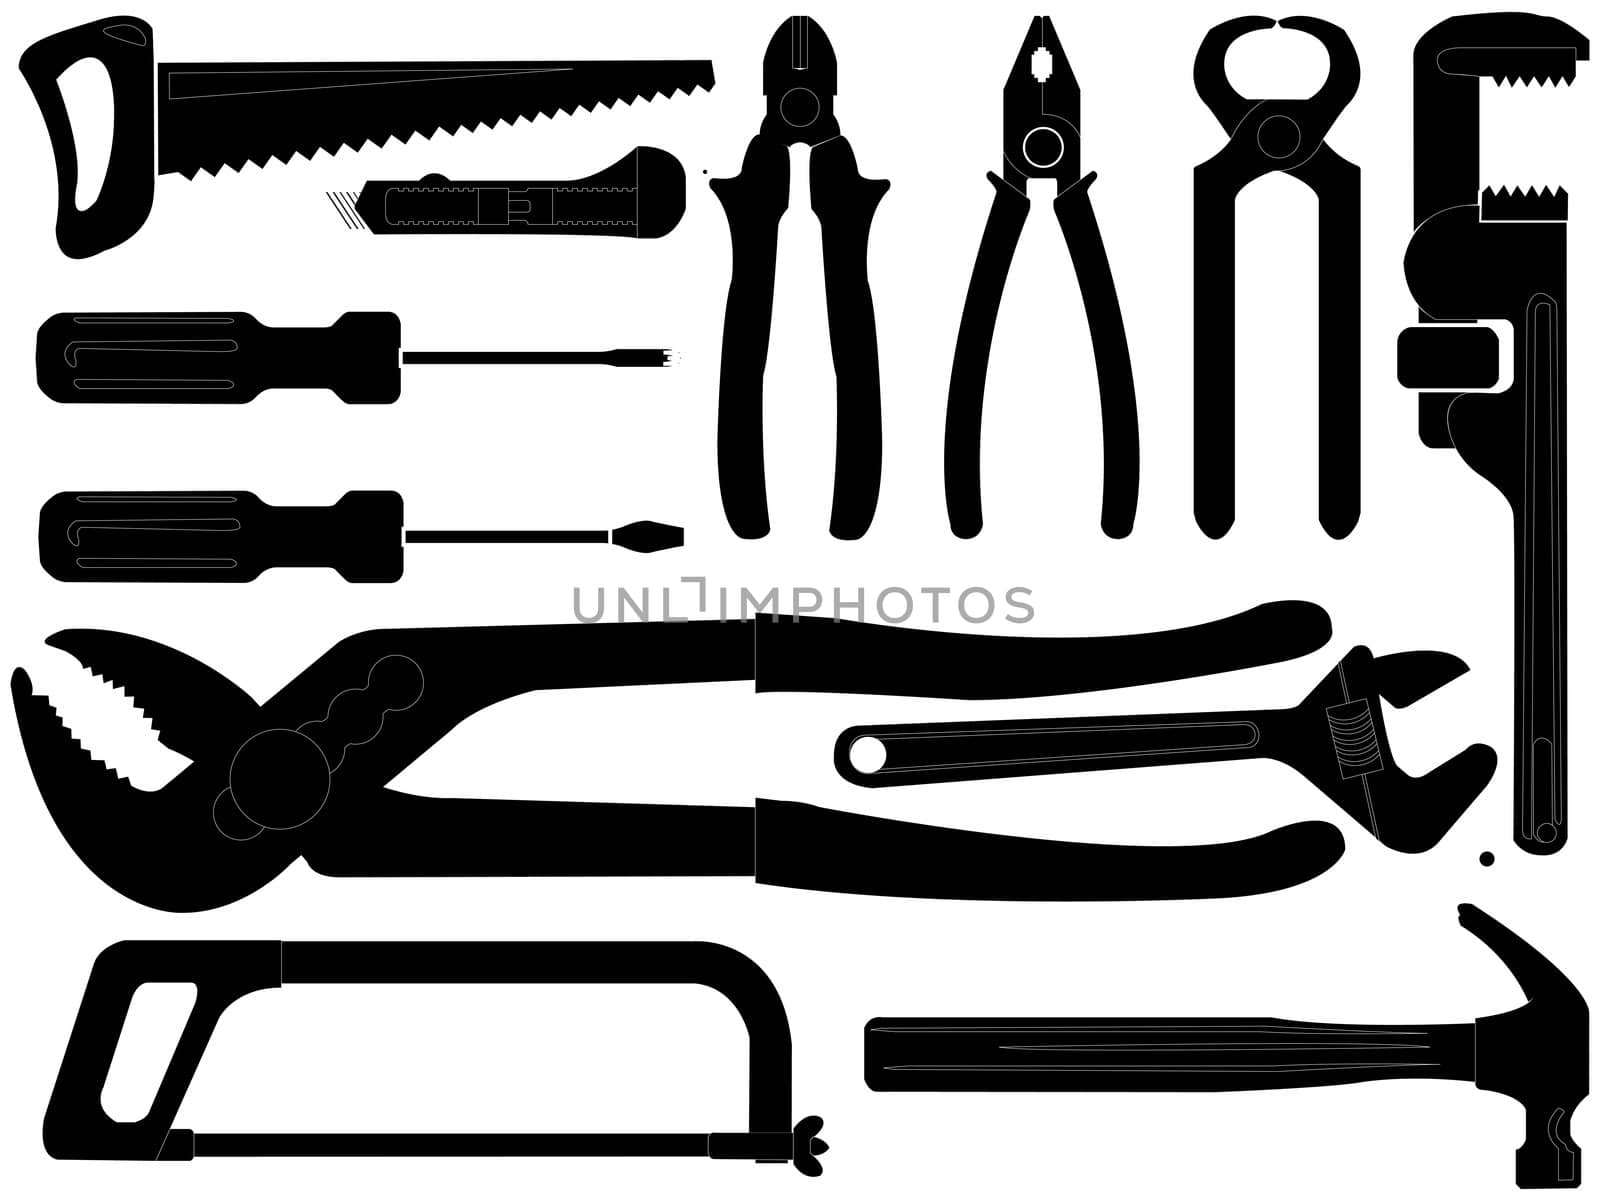 hand tools silhouettes over white by robertosch